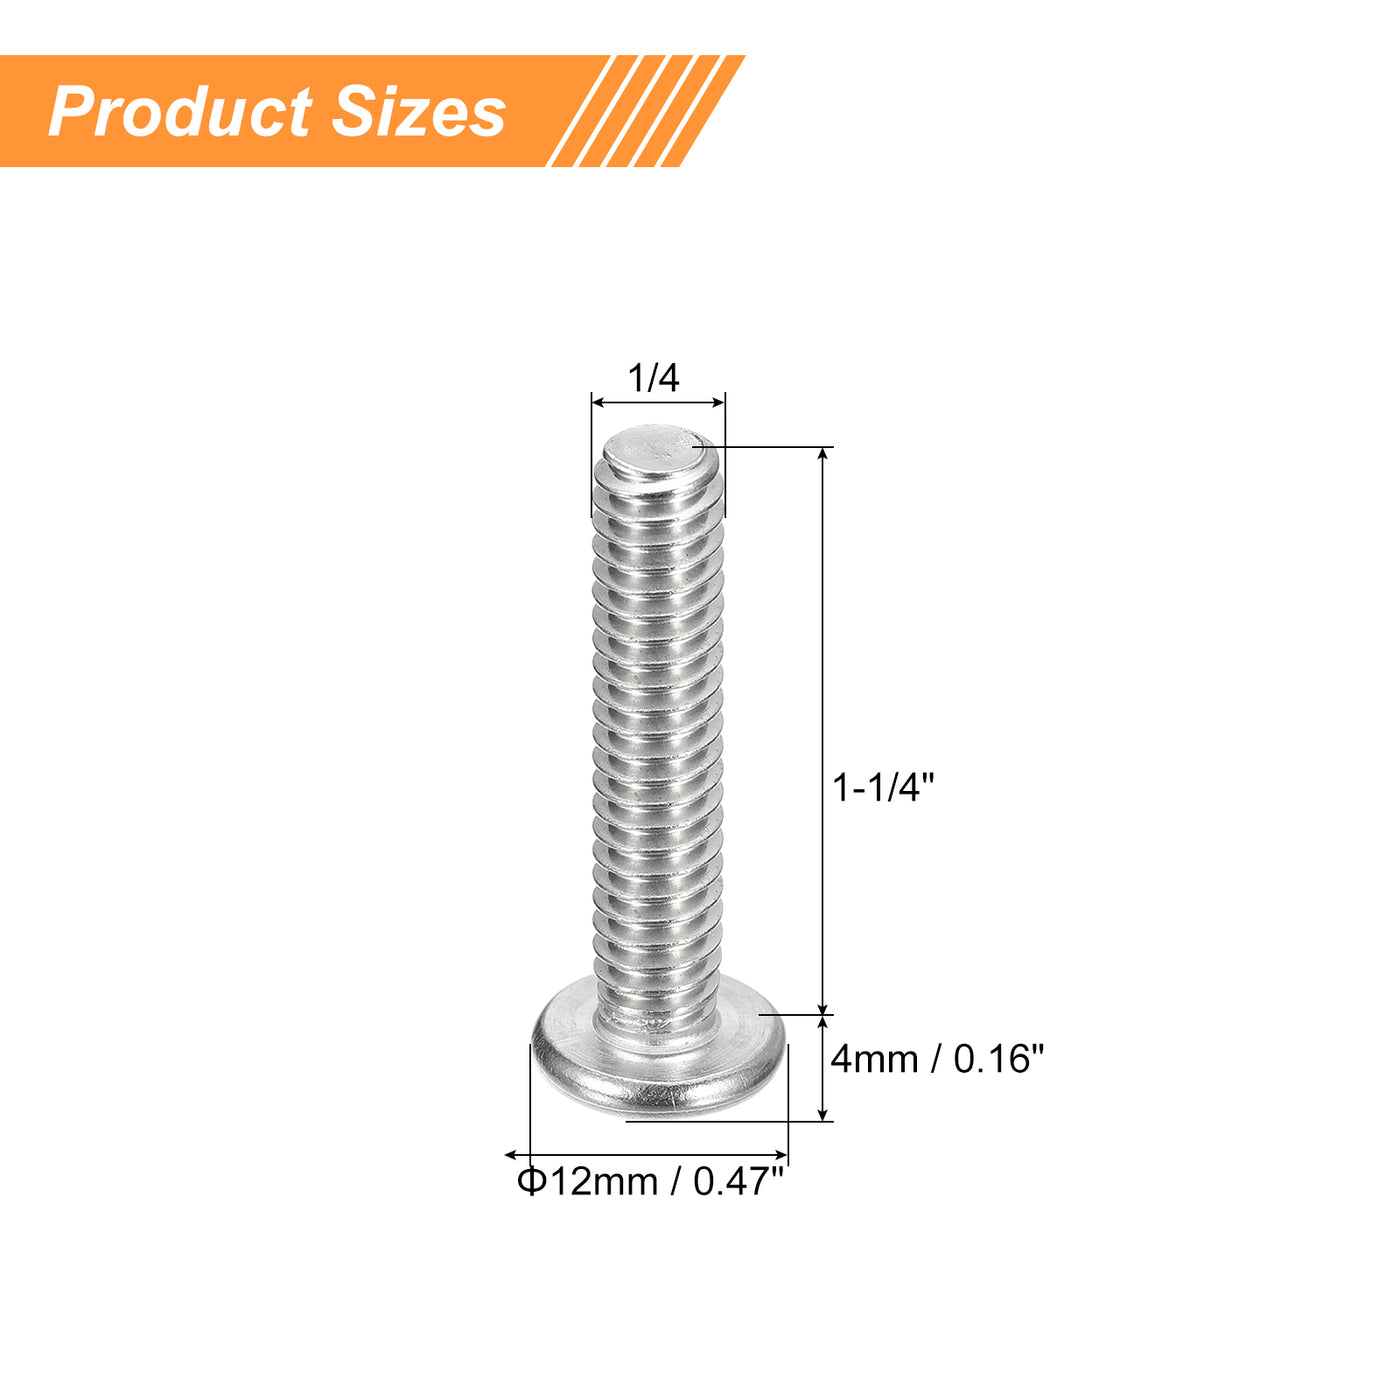 uxcell Uxcell 1/4-20x1-1/4" Pan Head Machine Screws, Stainless Steel 18-8 Screw, Pack of 50